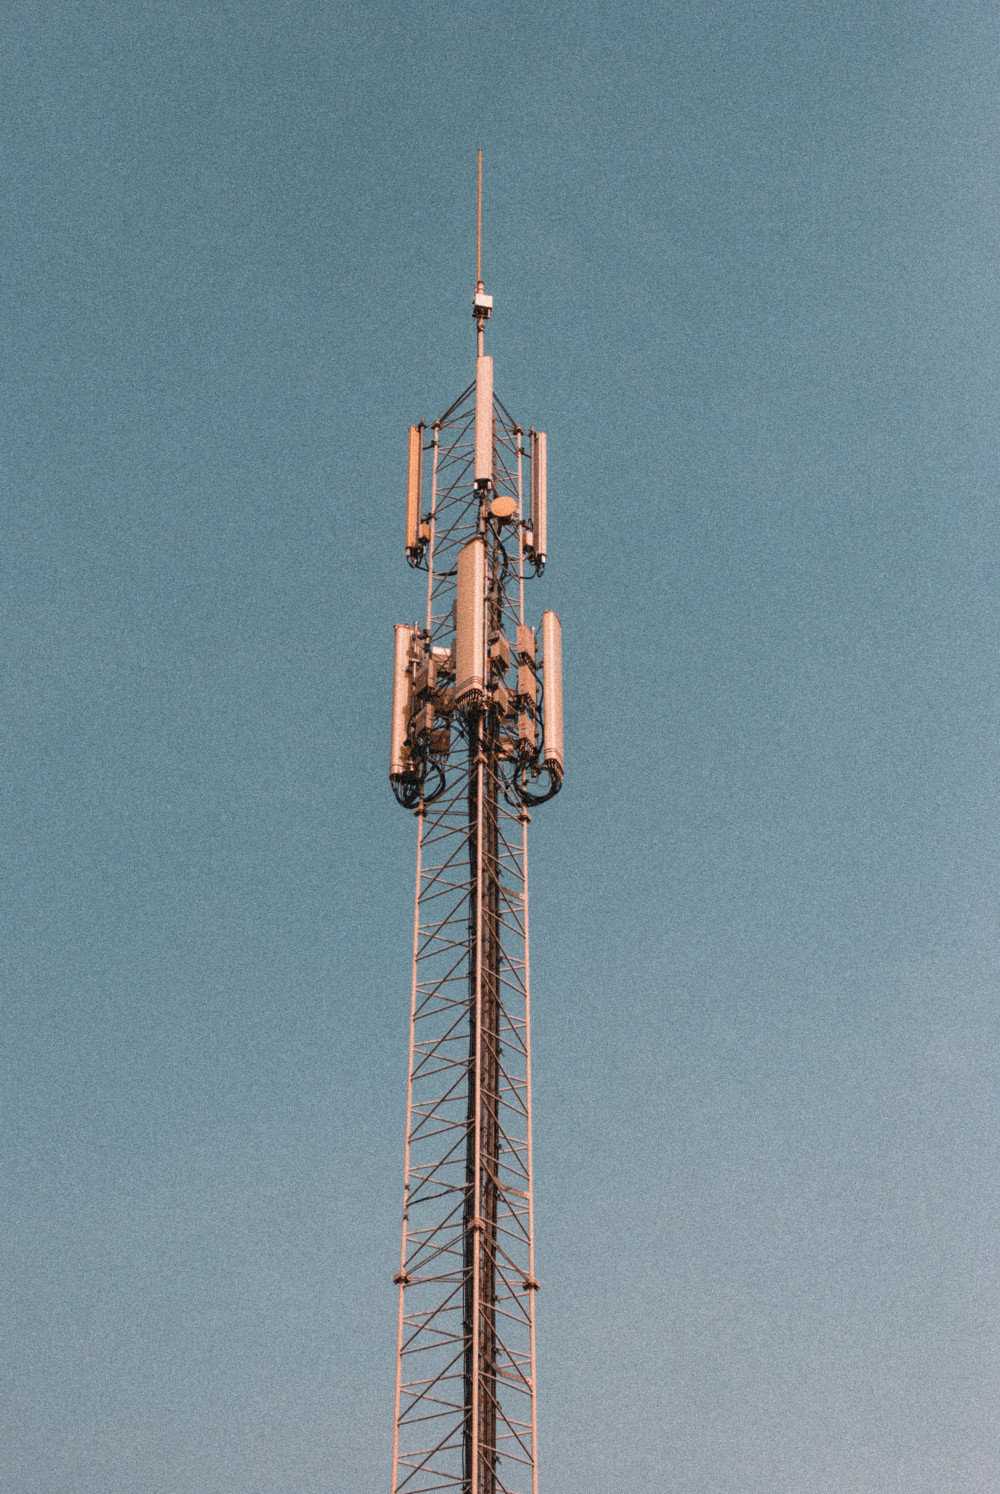 The proposed 5G mast on Old Hale Way could look like this. CREDIT: Unsplash